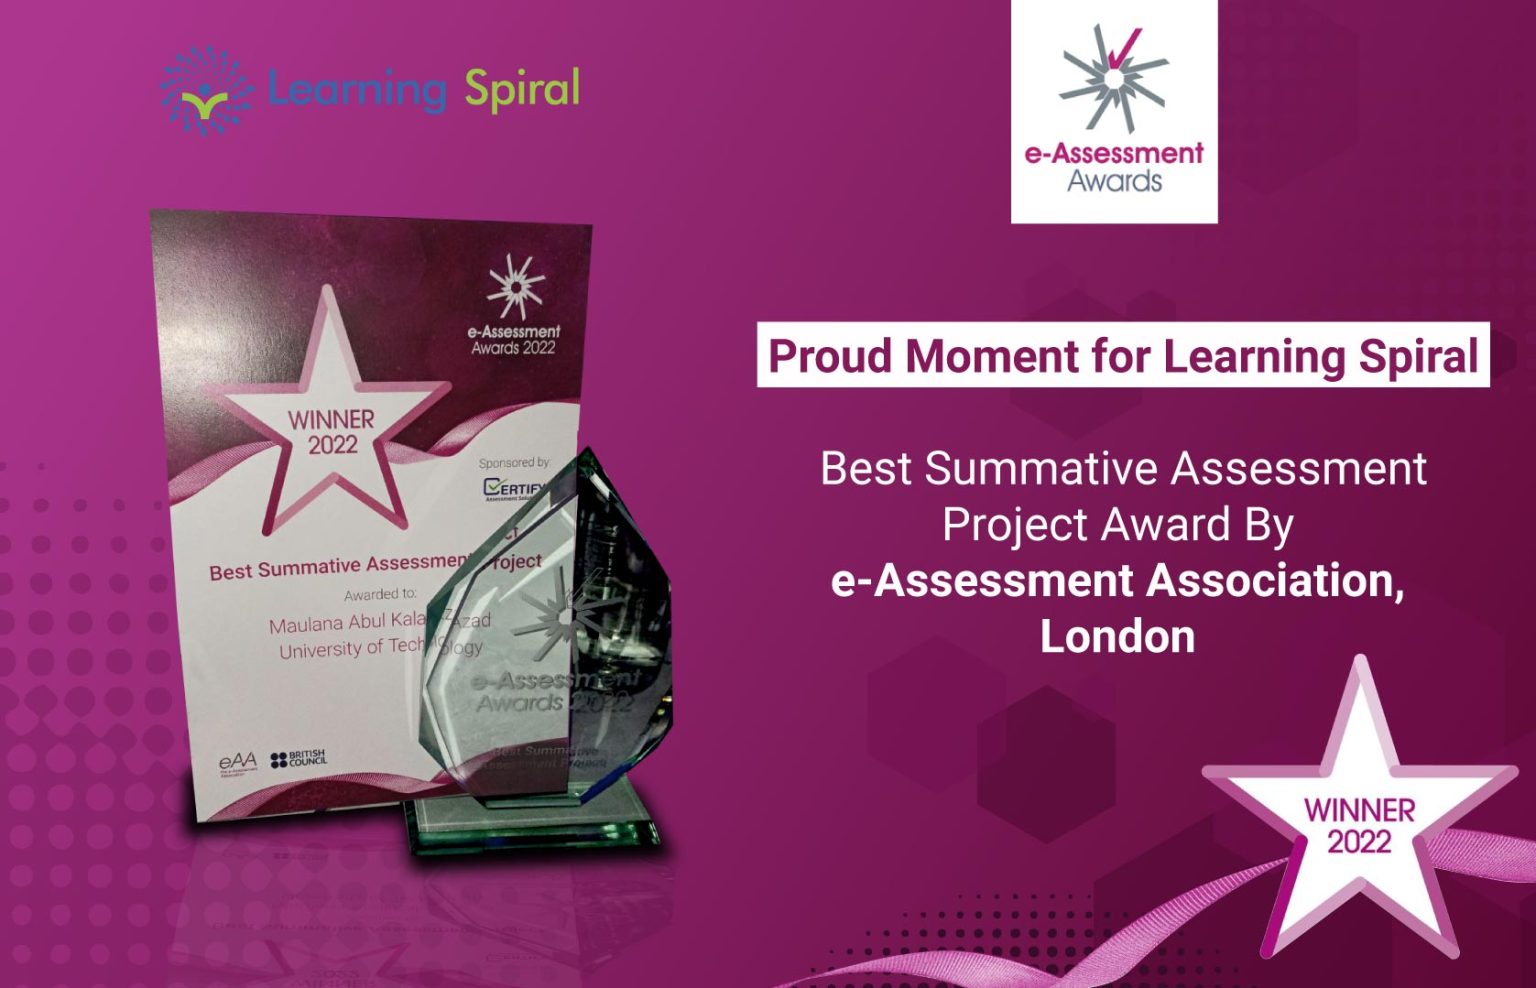 We are extremely proud to be awarded for Best Summative Assessment